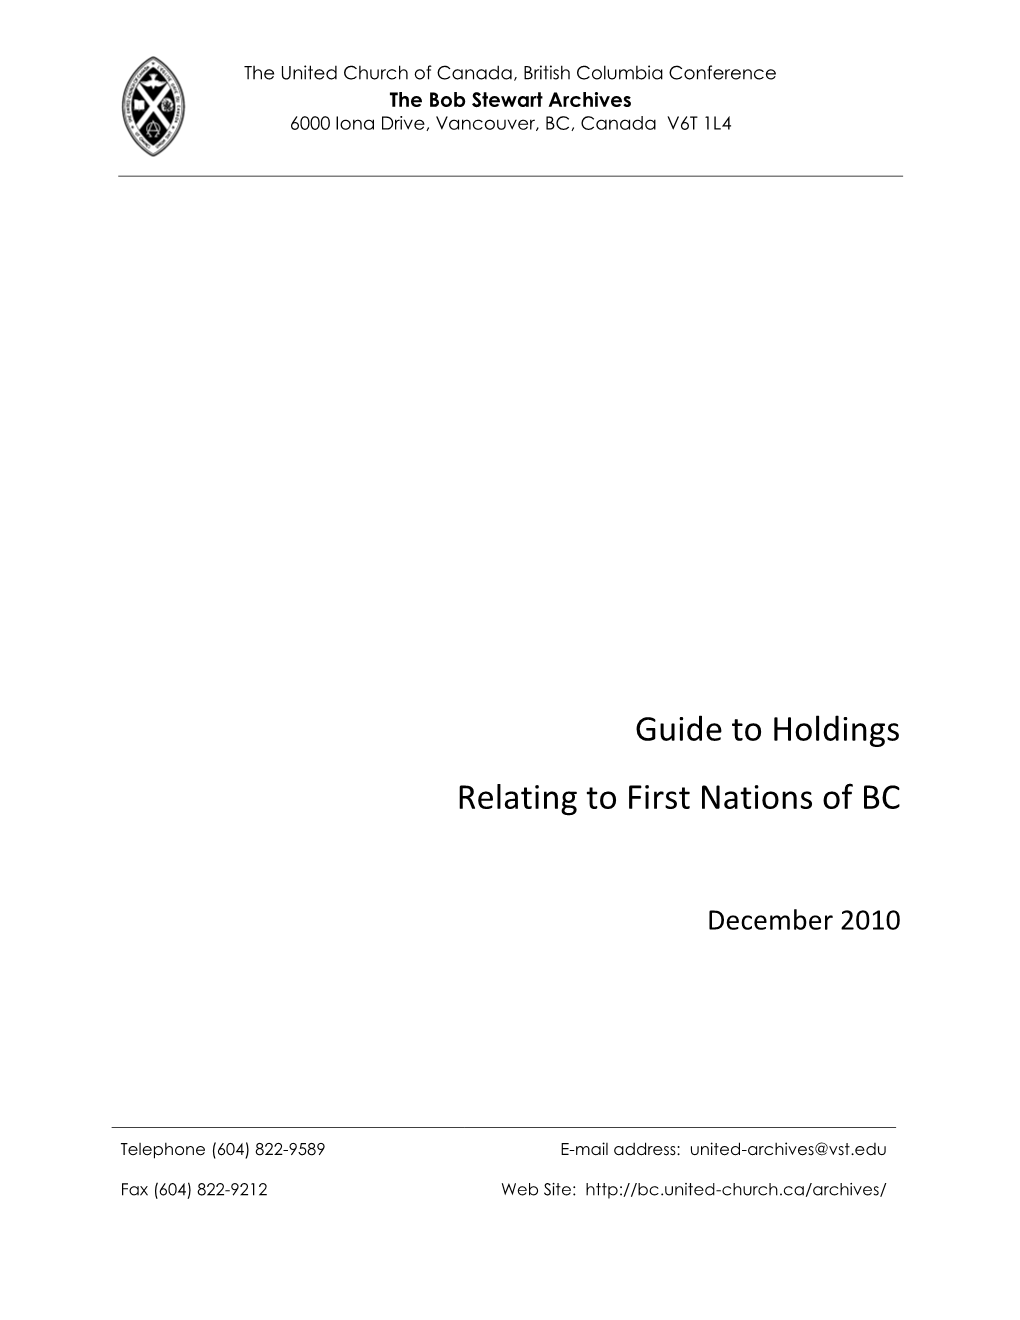 Guide to Holdings Relating to First Nations of BC